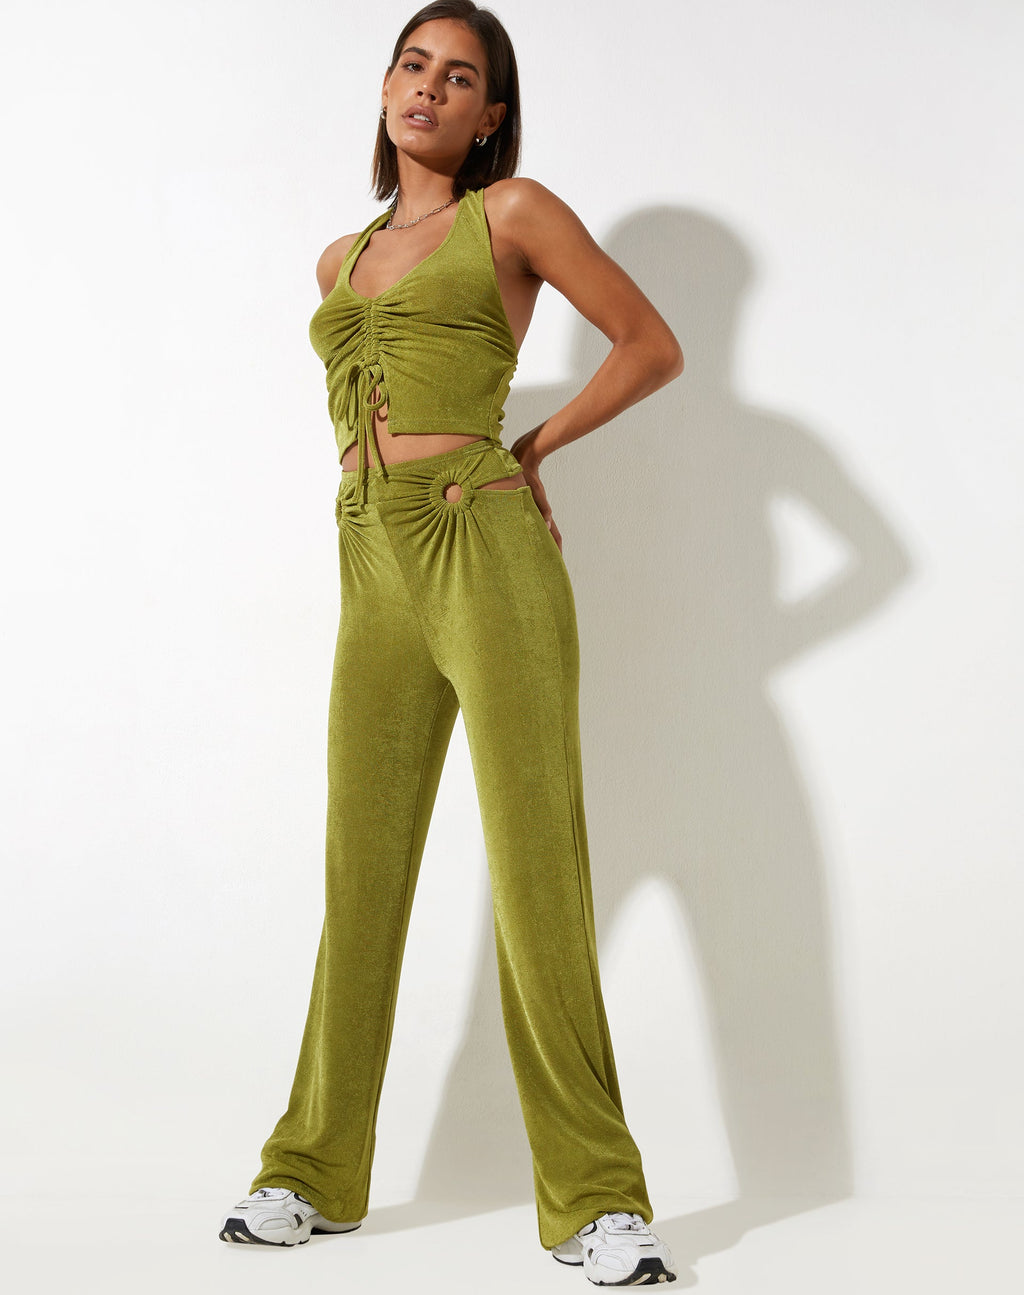 Sesaot Flare Trouser in Crepe Lime